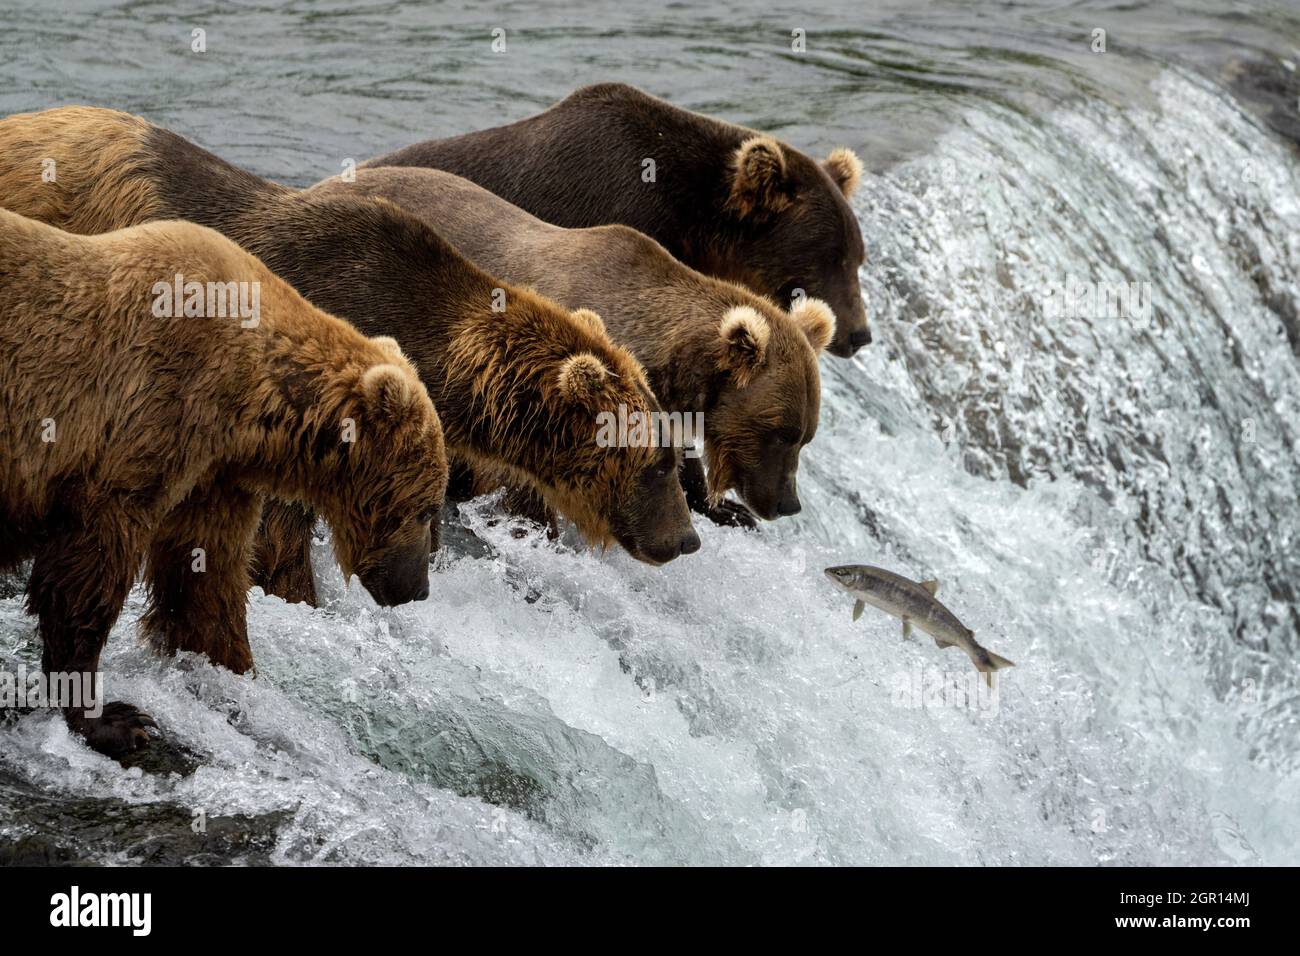 Adult Brown Bears stand on the falls edge to catch salmon at Brooks Falls in Katmai National Park and Preserve July 29, 2021 near King Salmon, Alaska. The park is holding the annual Fat Bear contest to decide which bear gained the most weight during the summer feeding season. Stock Photo